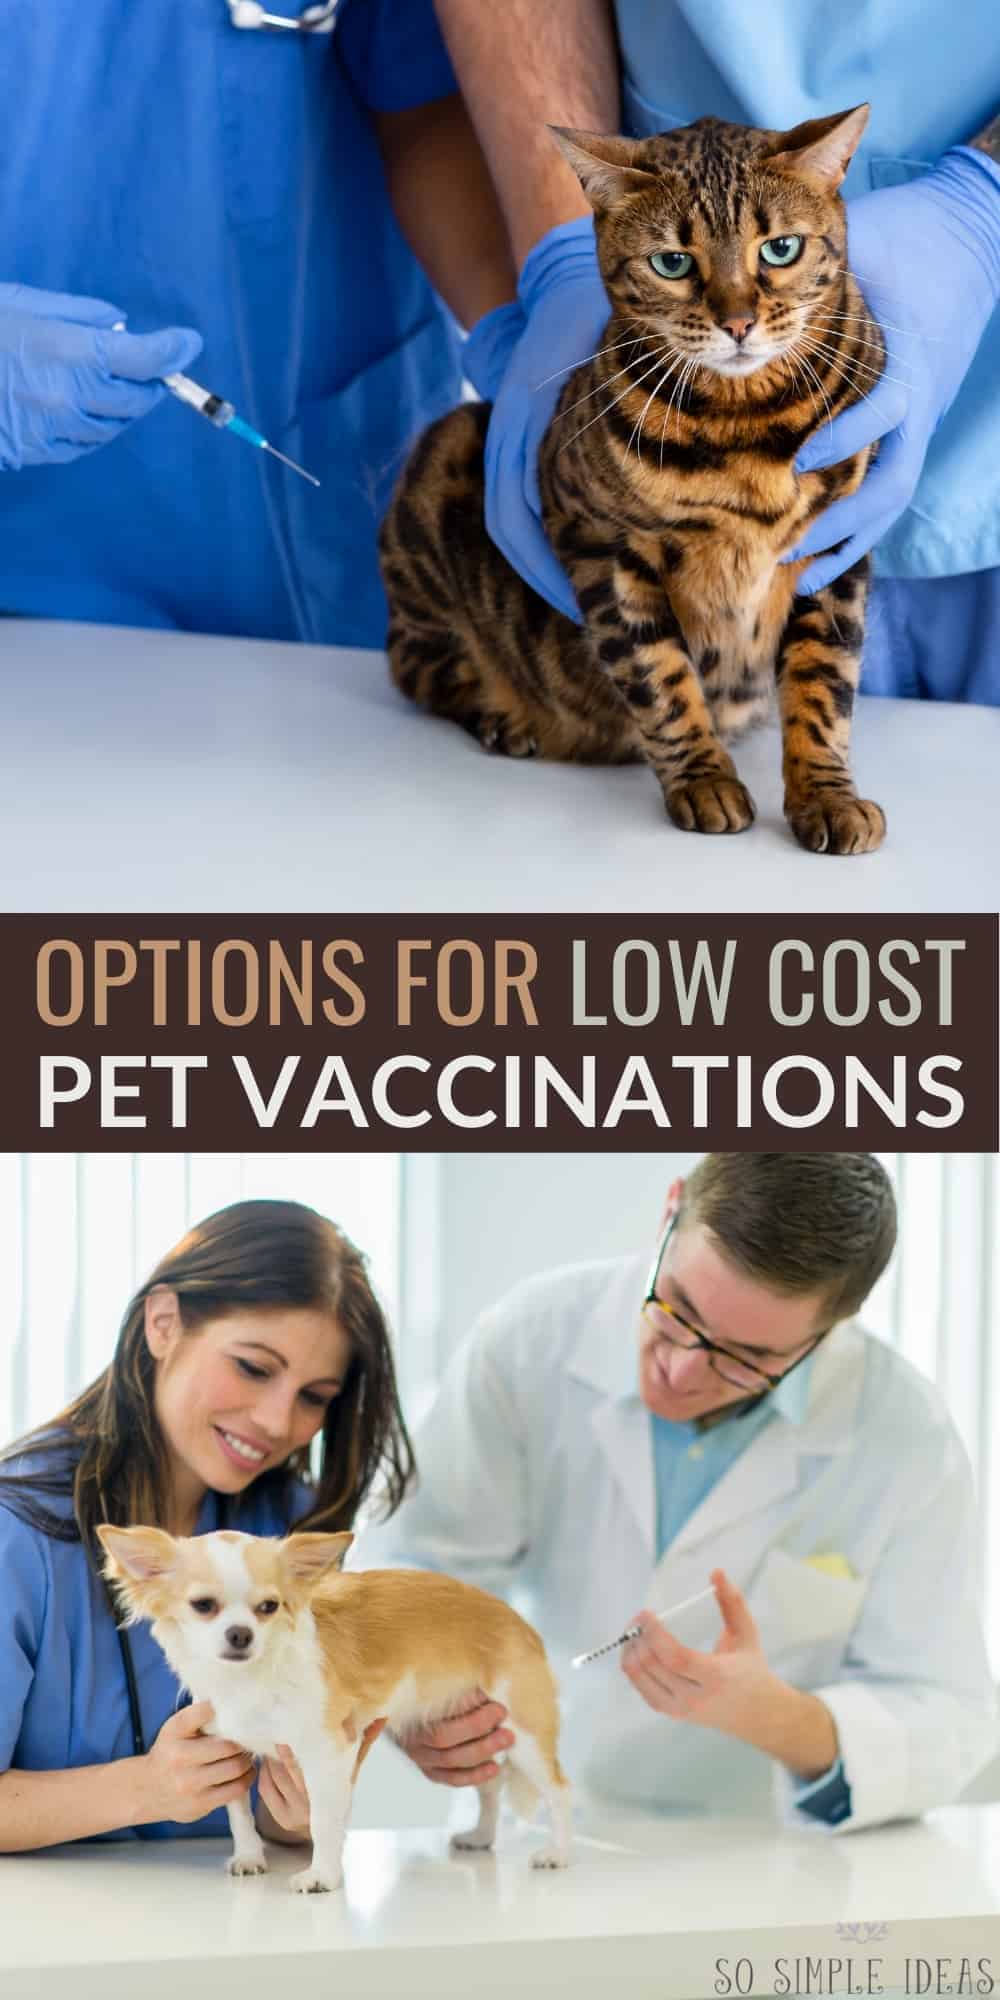 Low Cost Pet Vaccinations at Walgreens & Petco So Simple Ideas